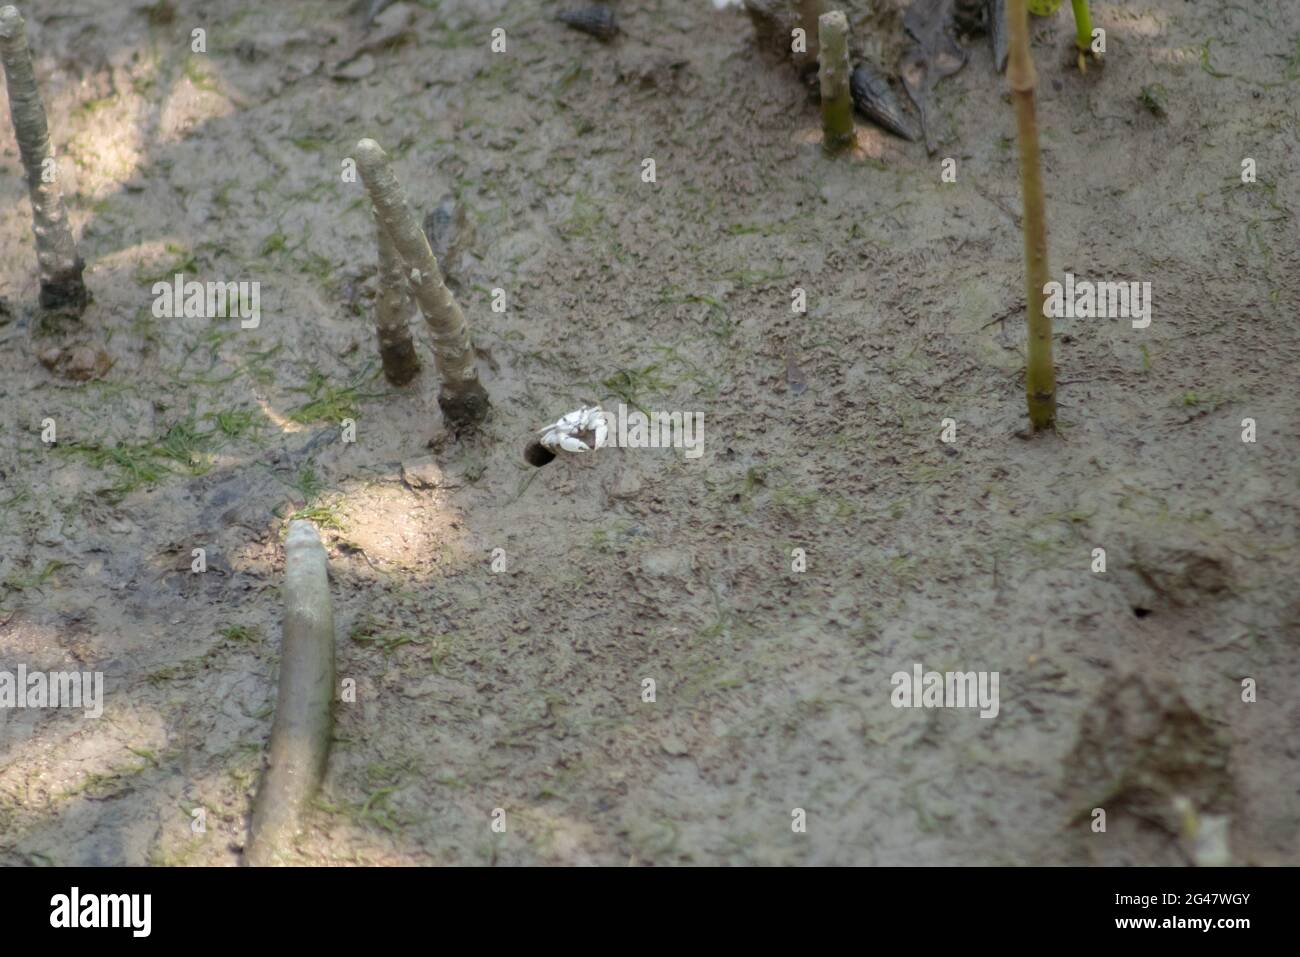 A small white crab called White Semaphore Crab(Ilyoplax delsmani) on the mudflats in mangrove forest, Tanjung Piai Rainforest, Malaysia Stock Photo